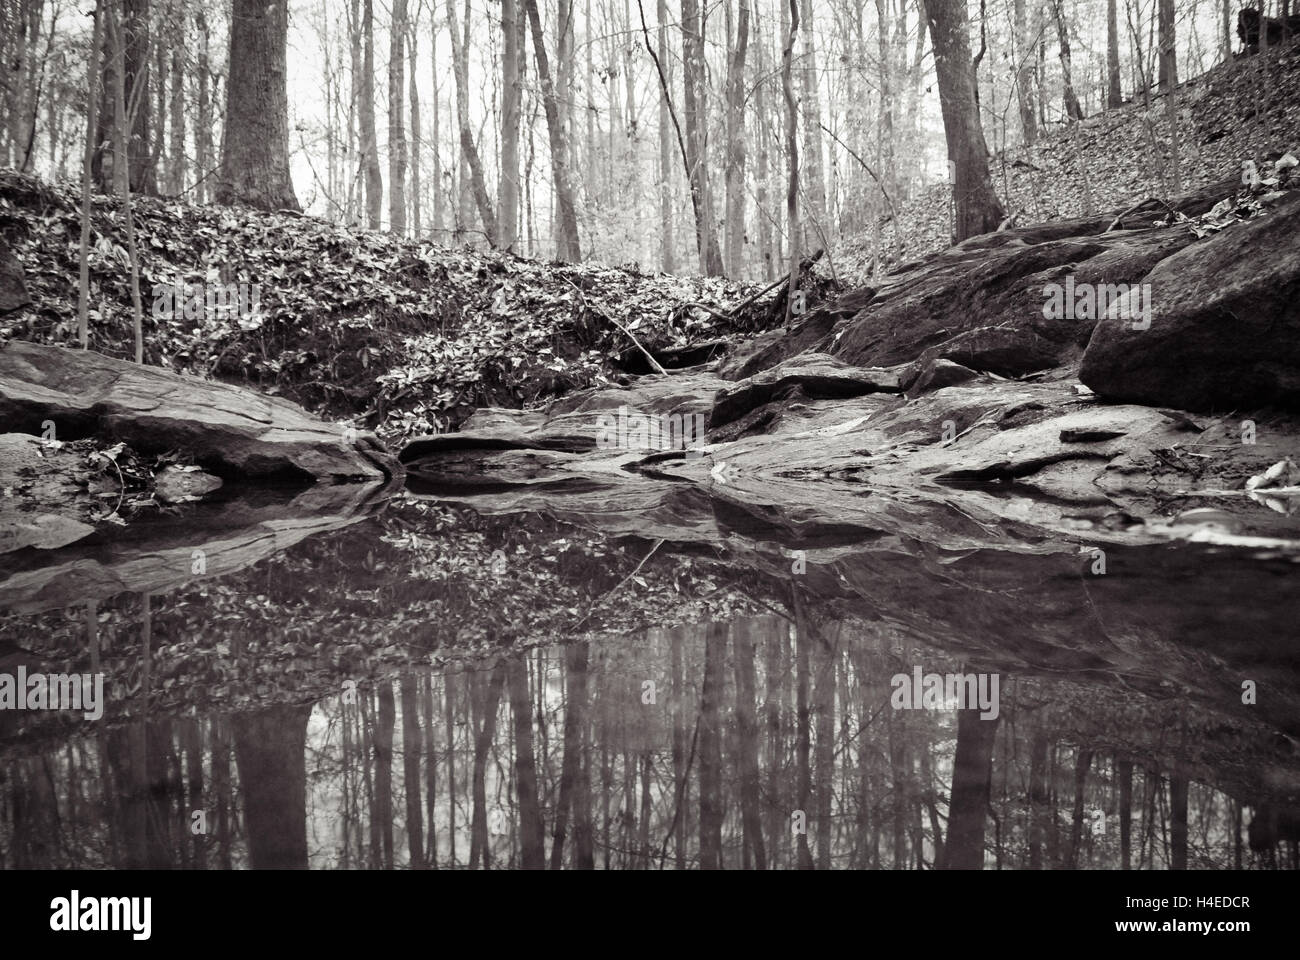 Peaceful wooded scene of a tranquil creek in Troutman, North Carolina near Lake Norman. Stock Photo